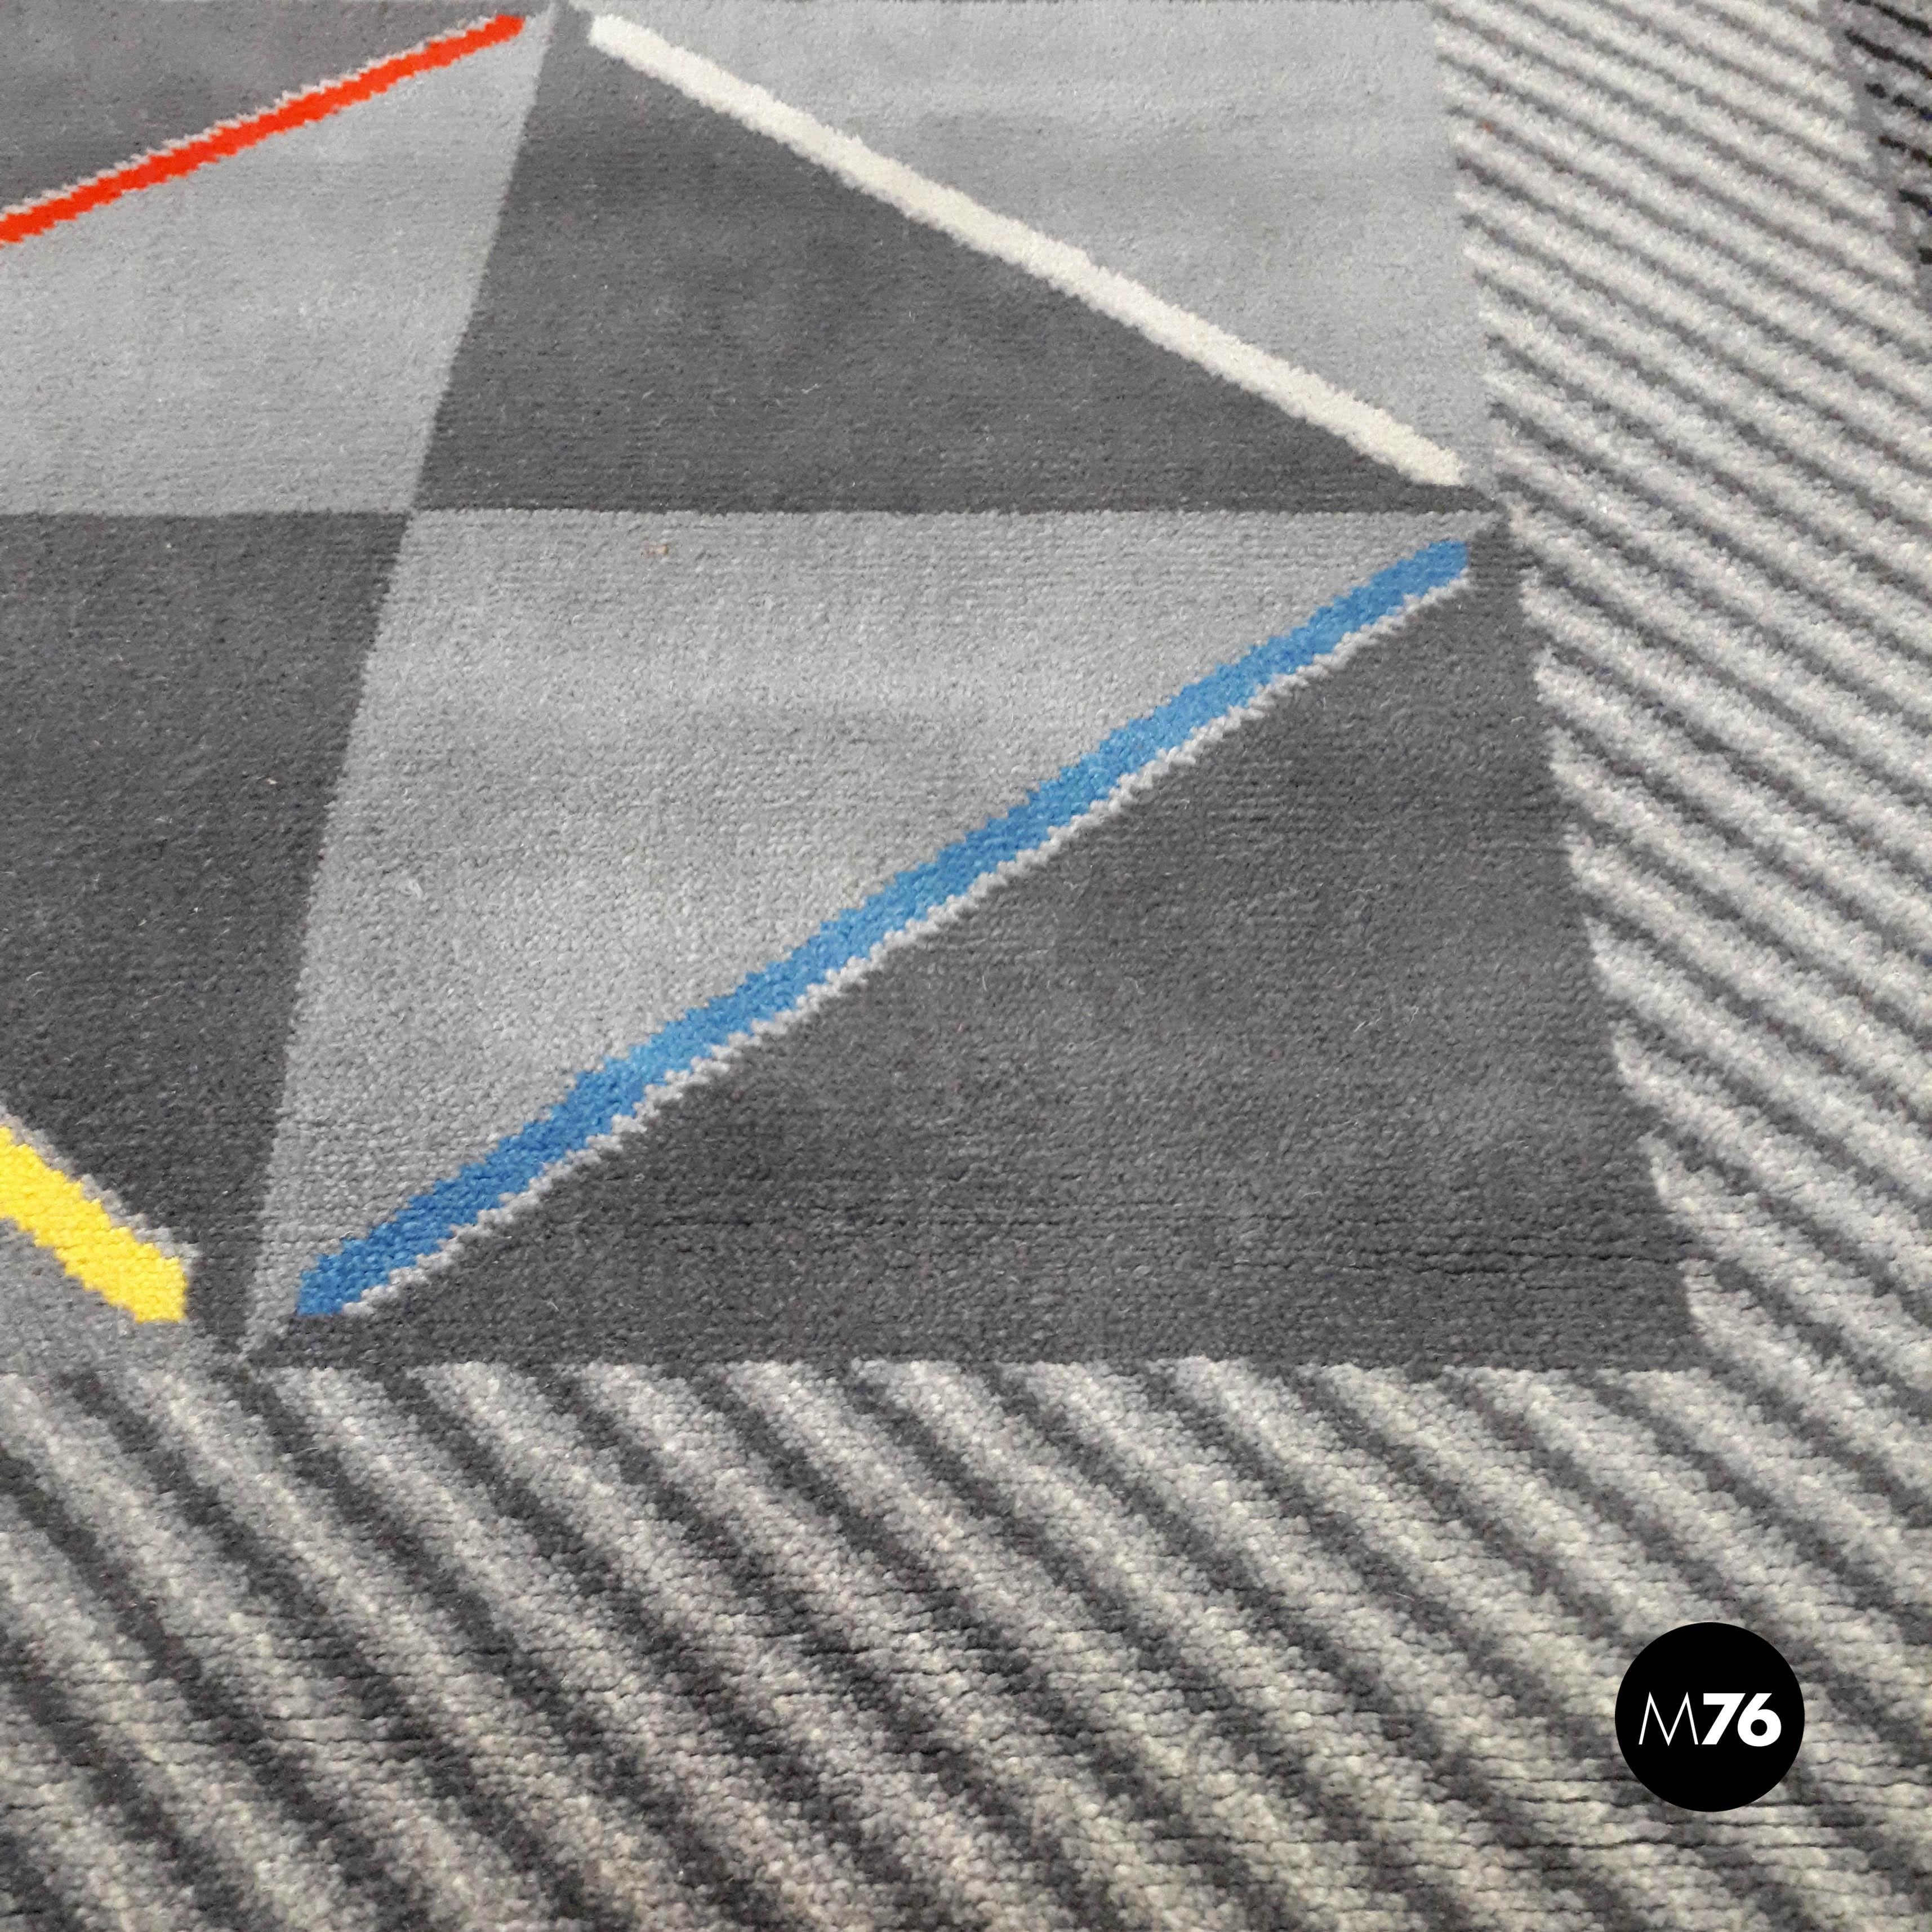 Mid-Century Modern diamond pattern carpet, '80
Gray geometric carpet with red, yellow, blue and white colored rhombuses, '80s.

Very good condition.

Measurements 236x168 cm.